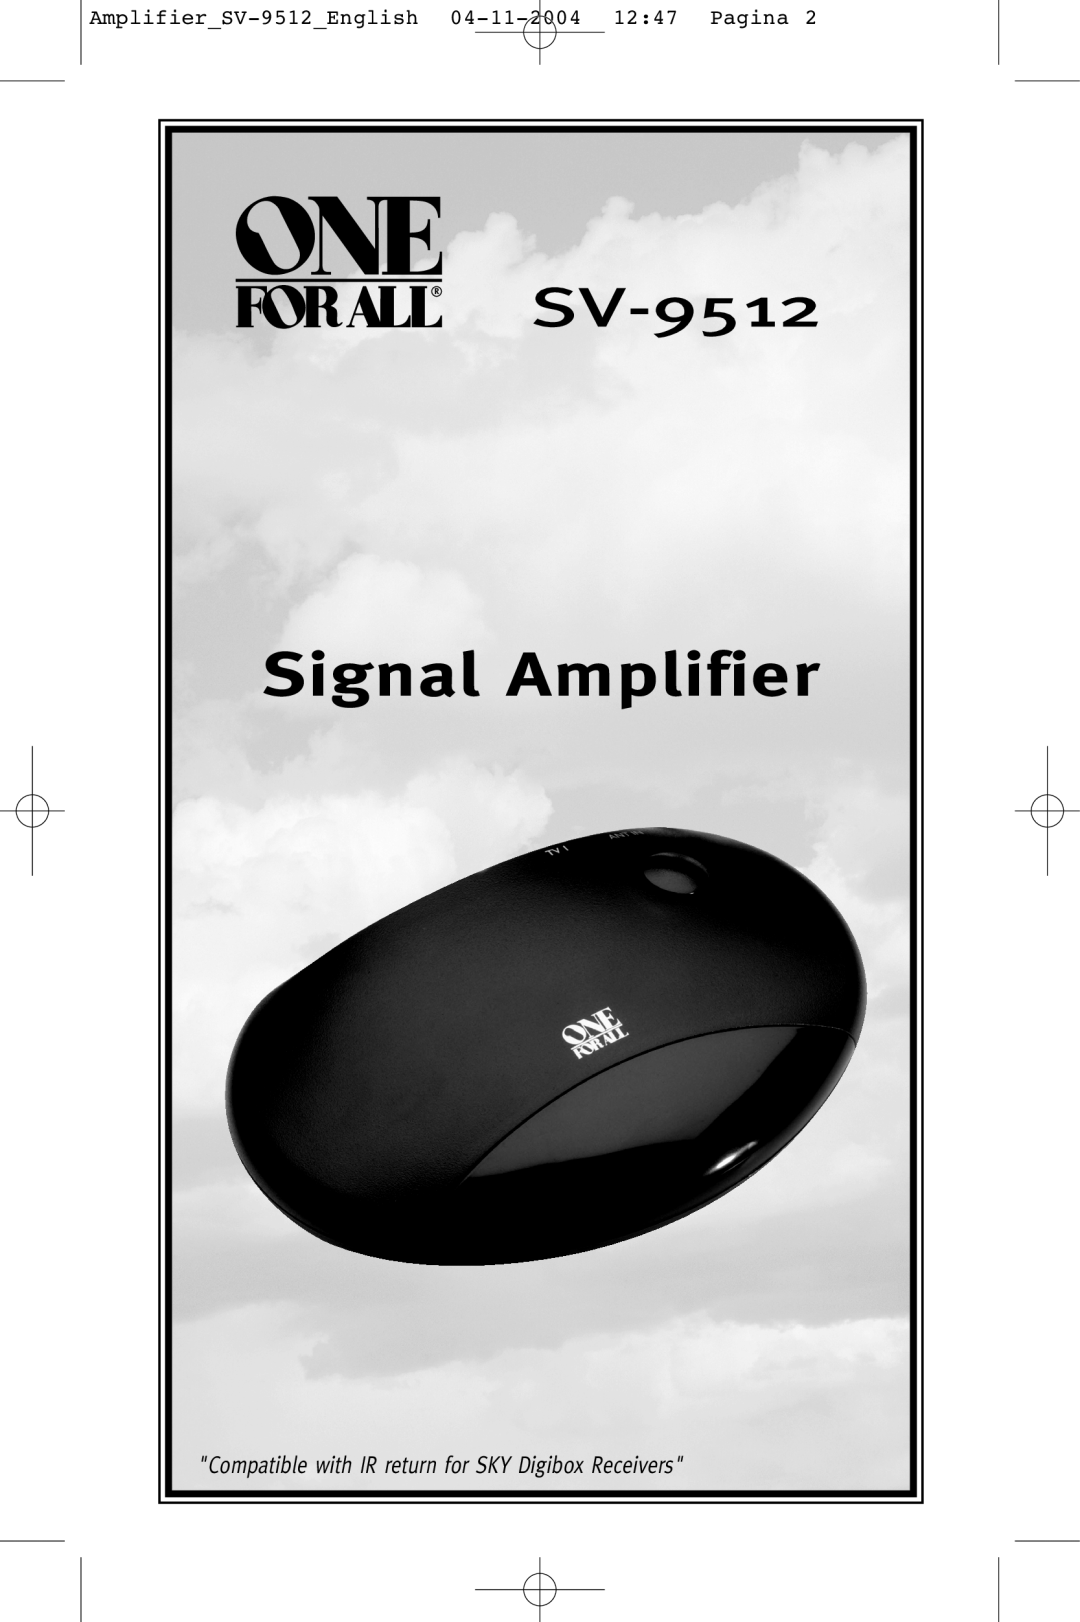 One for All manual Amplifier SV-9512 English 04-11-200412 47 Pagina, Signal Amplifier, RSV-9512 